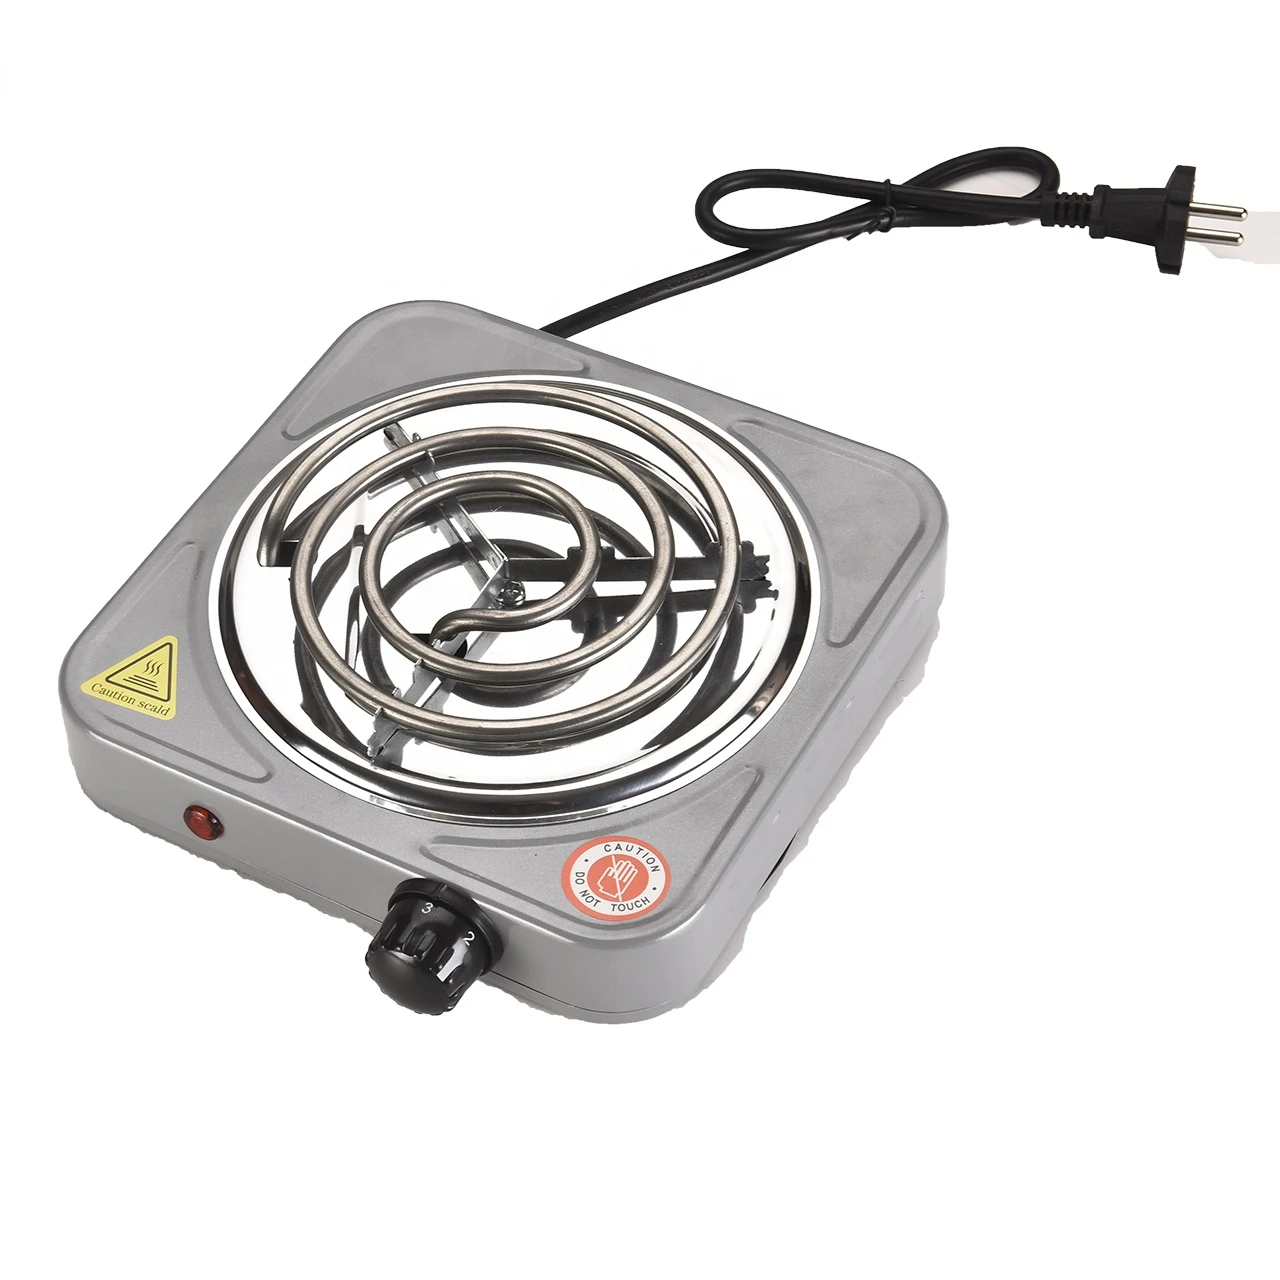 Portable  small hot plate household electric cooking stove